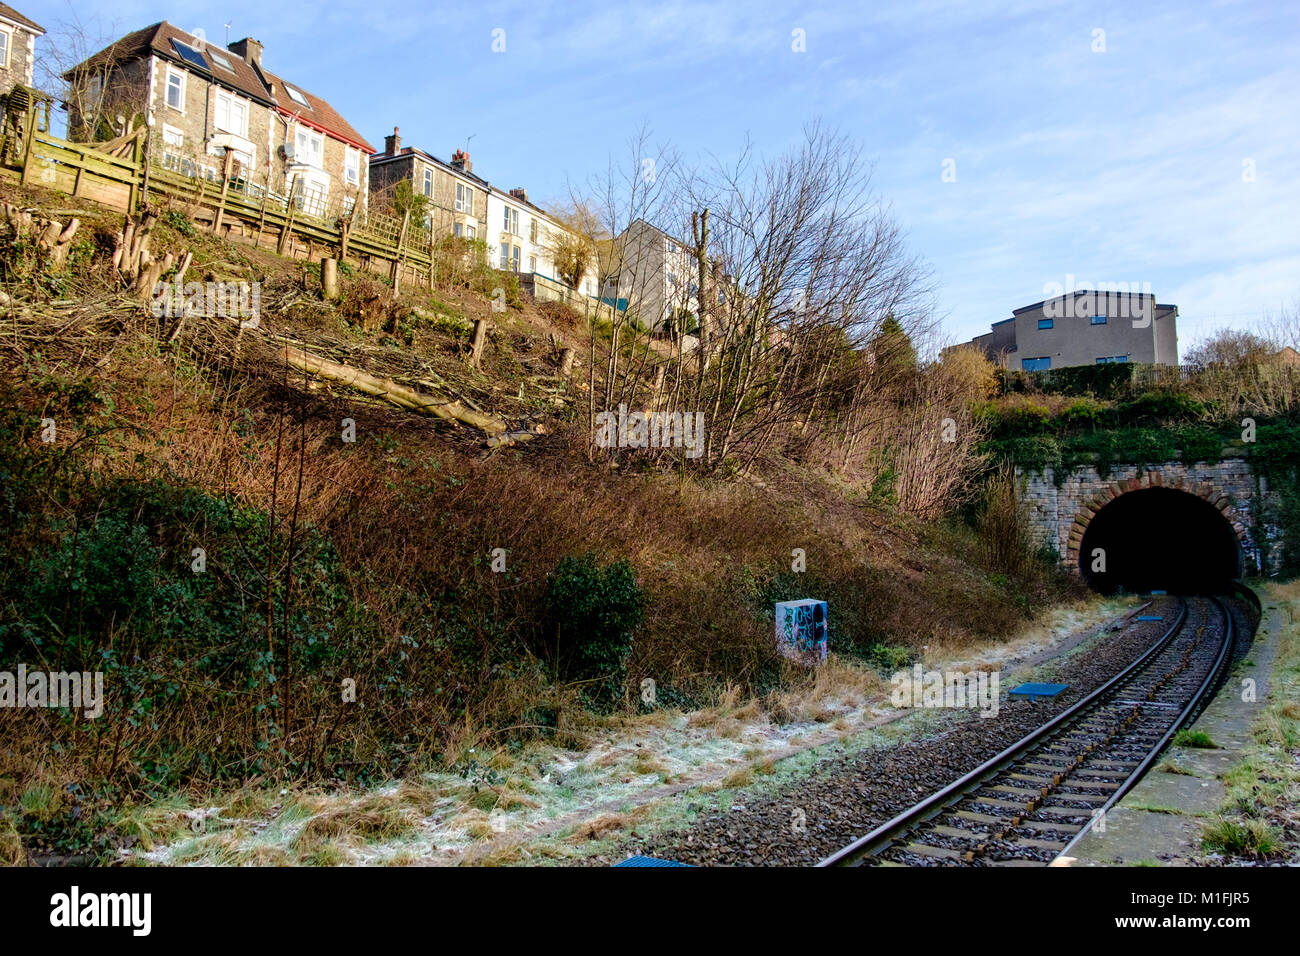 30th January 2018. Bristol, UK. Local residents have complained about the effect the sycamore trees have had on theirgardens, so they have removed the trees. Network rail has saiid it was concerned about the safety issues of people accessing the site and it had not given permision for the trees to be removed. Residents were under the impression permission had bee given. Picutures show the view from Montpelier station. Credit: JMF News/Alamy Live News Stock Photo